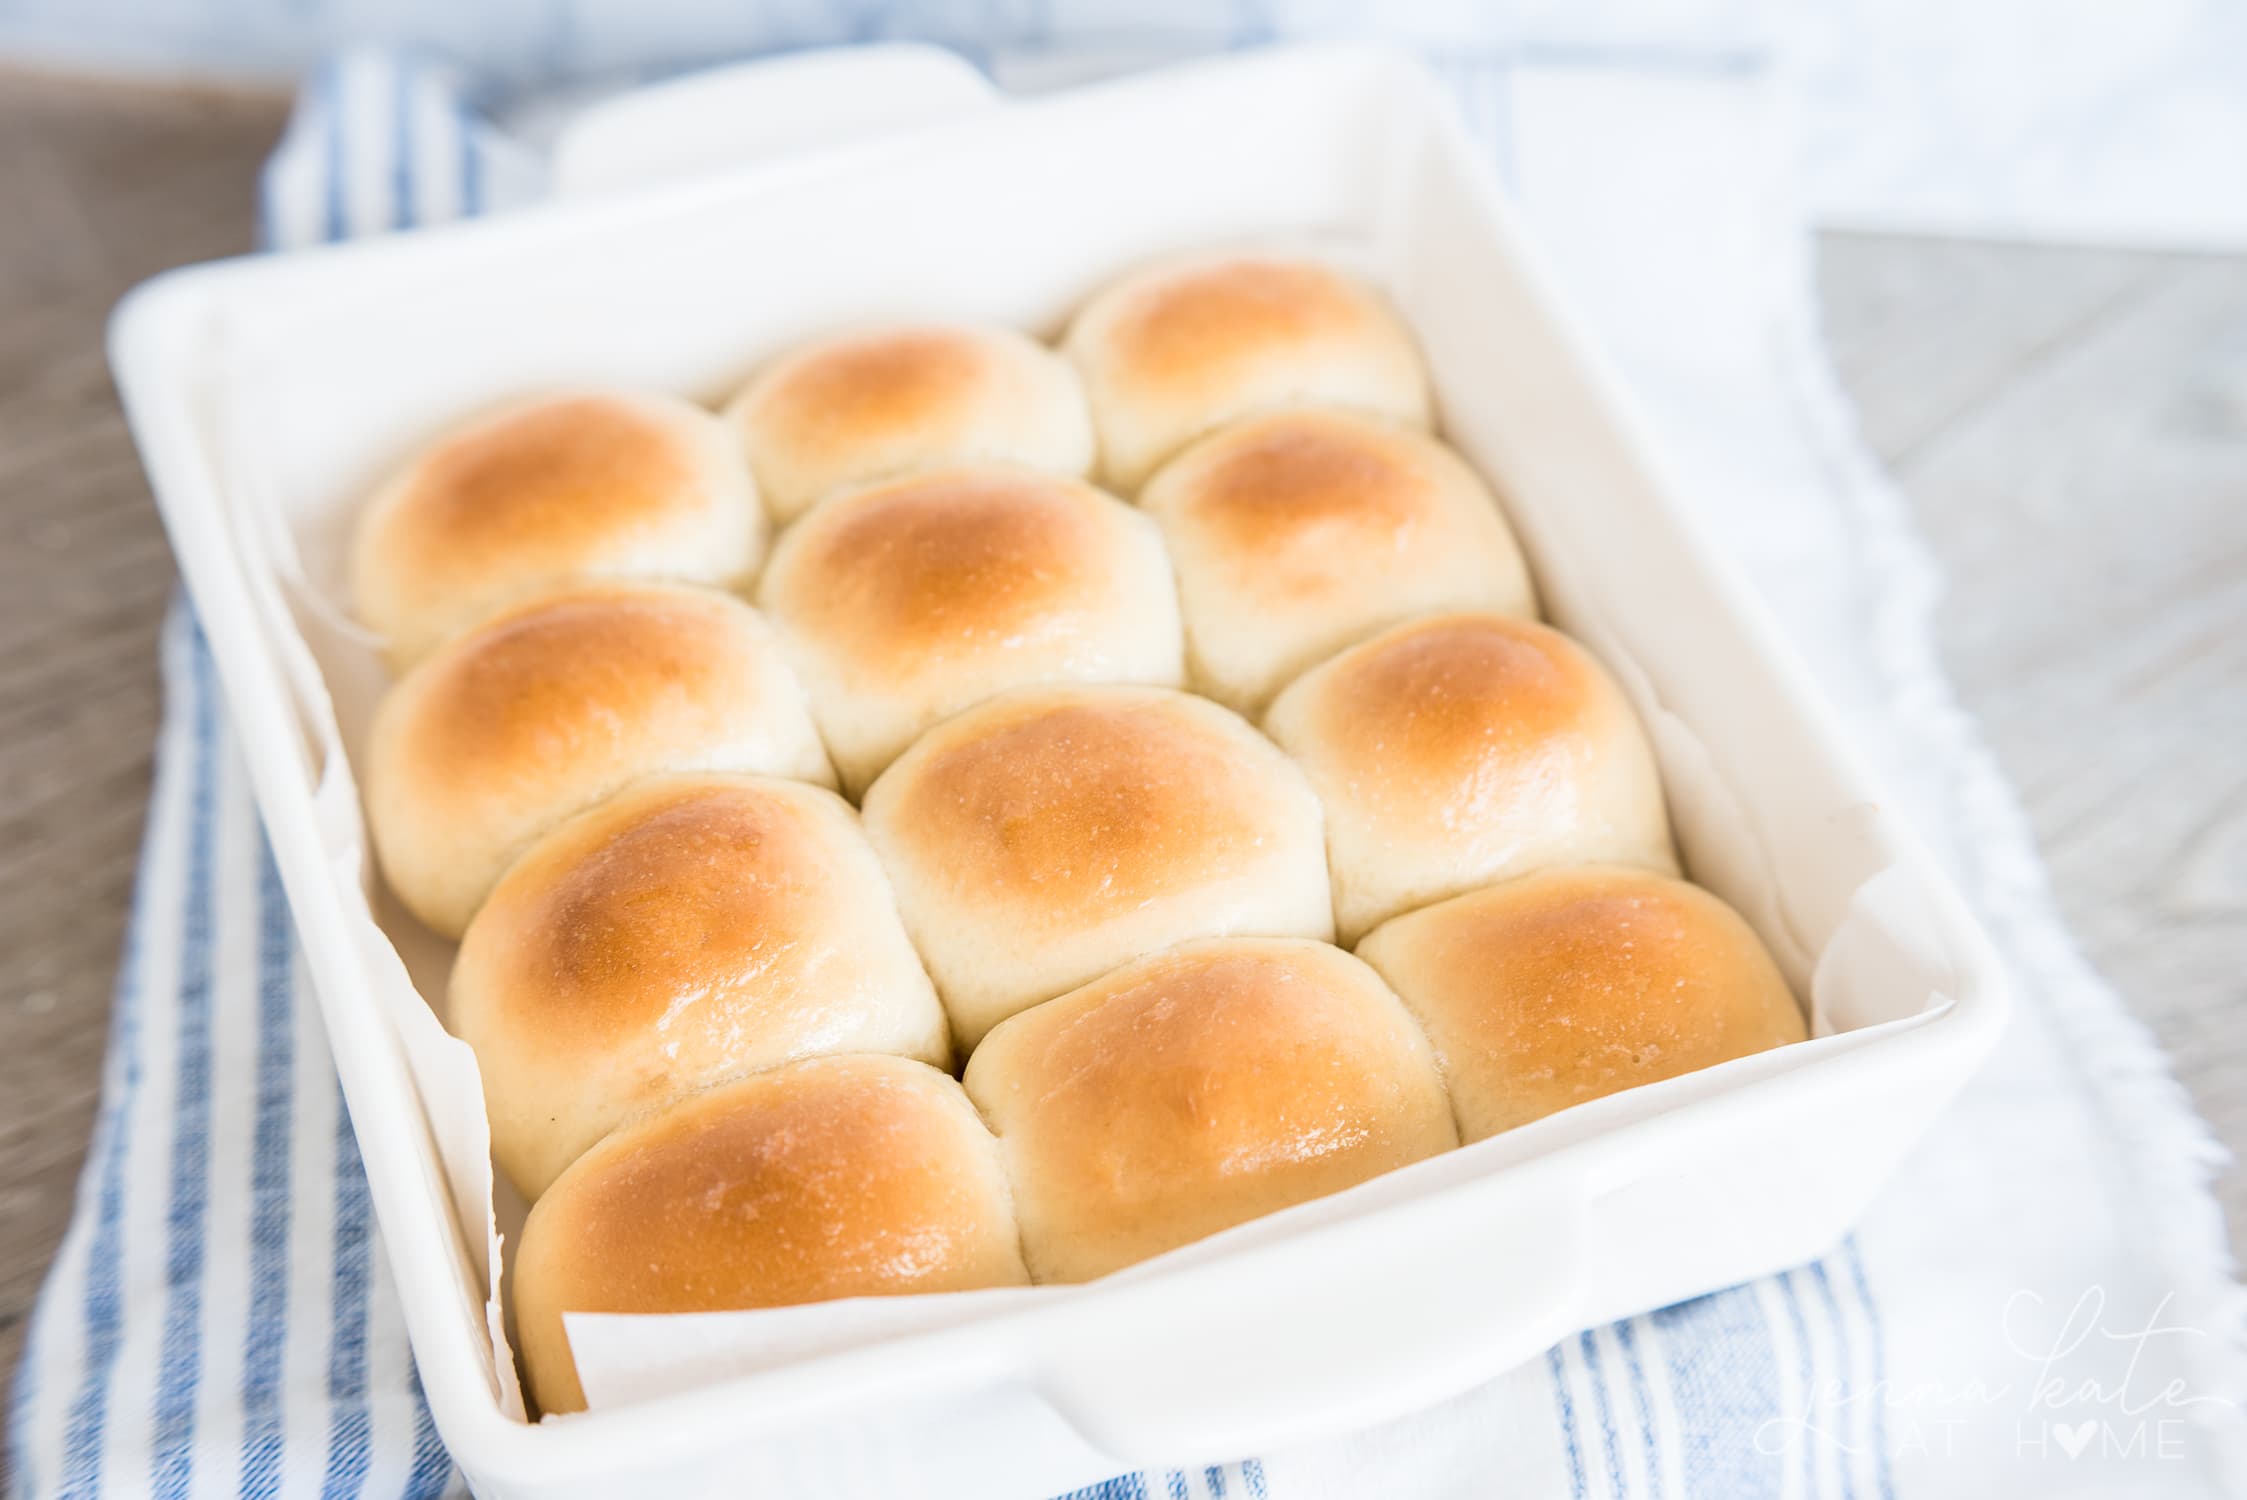 Light and fluffy recipe for quick dinner rolls. Perfect for the holidays.